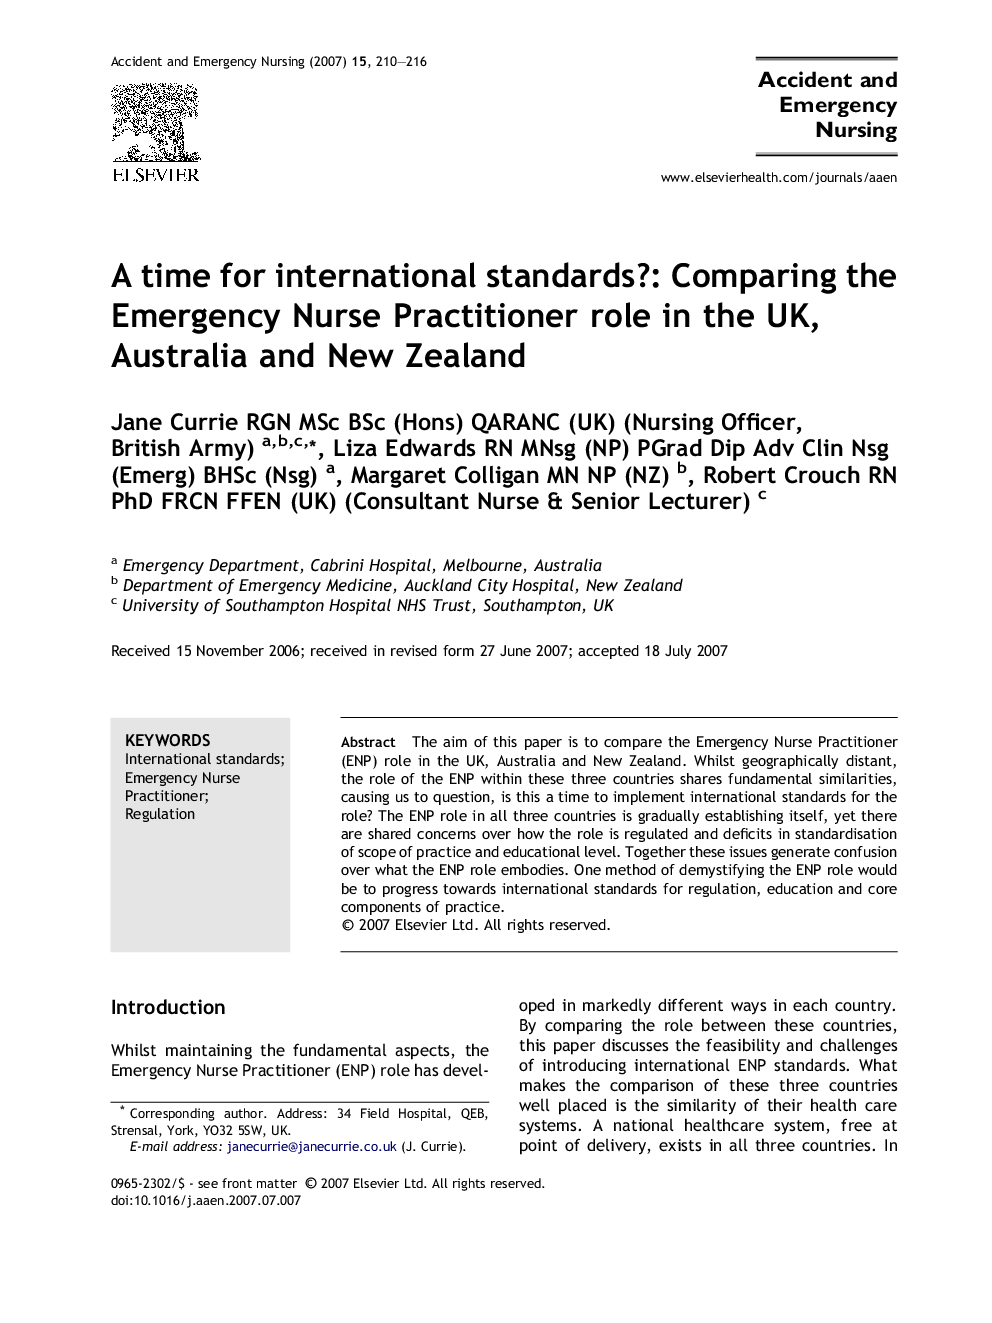 A time for international standards?: Comparing the Emergency Nurse Practitioner role in the UK, Australia and New Zealand